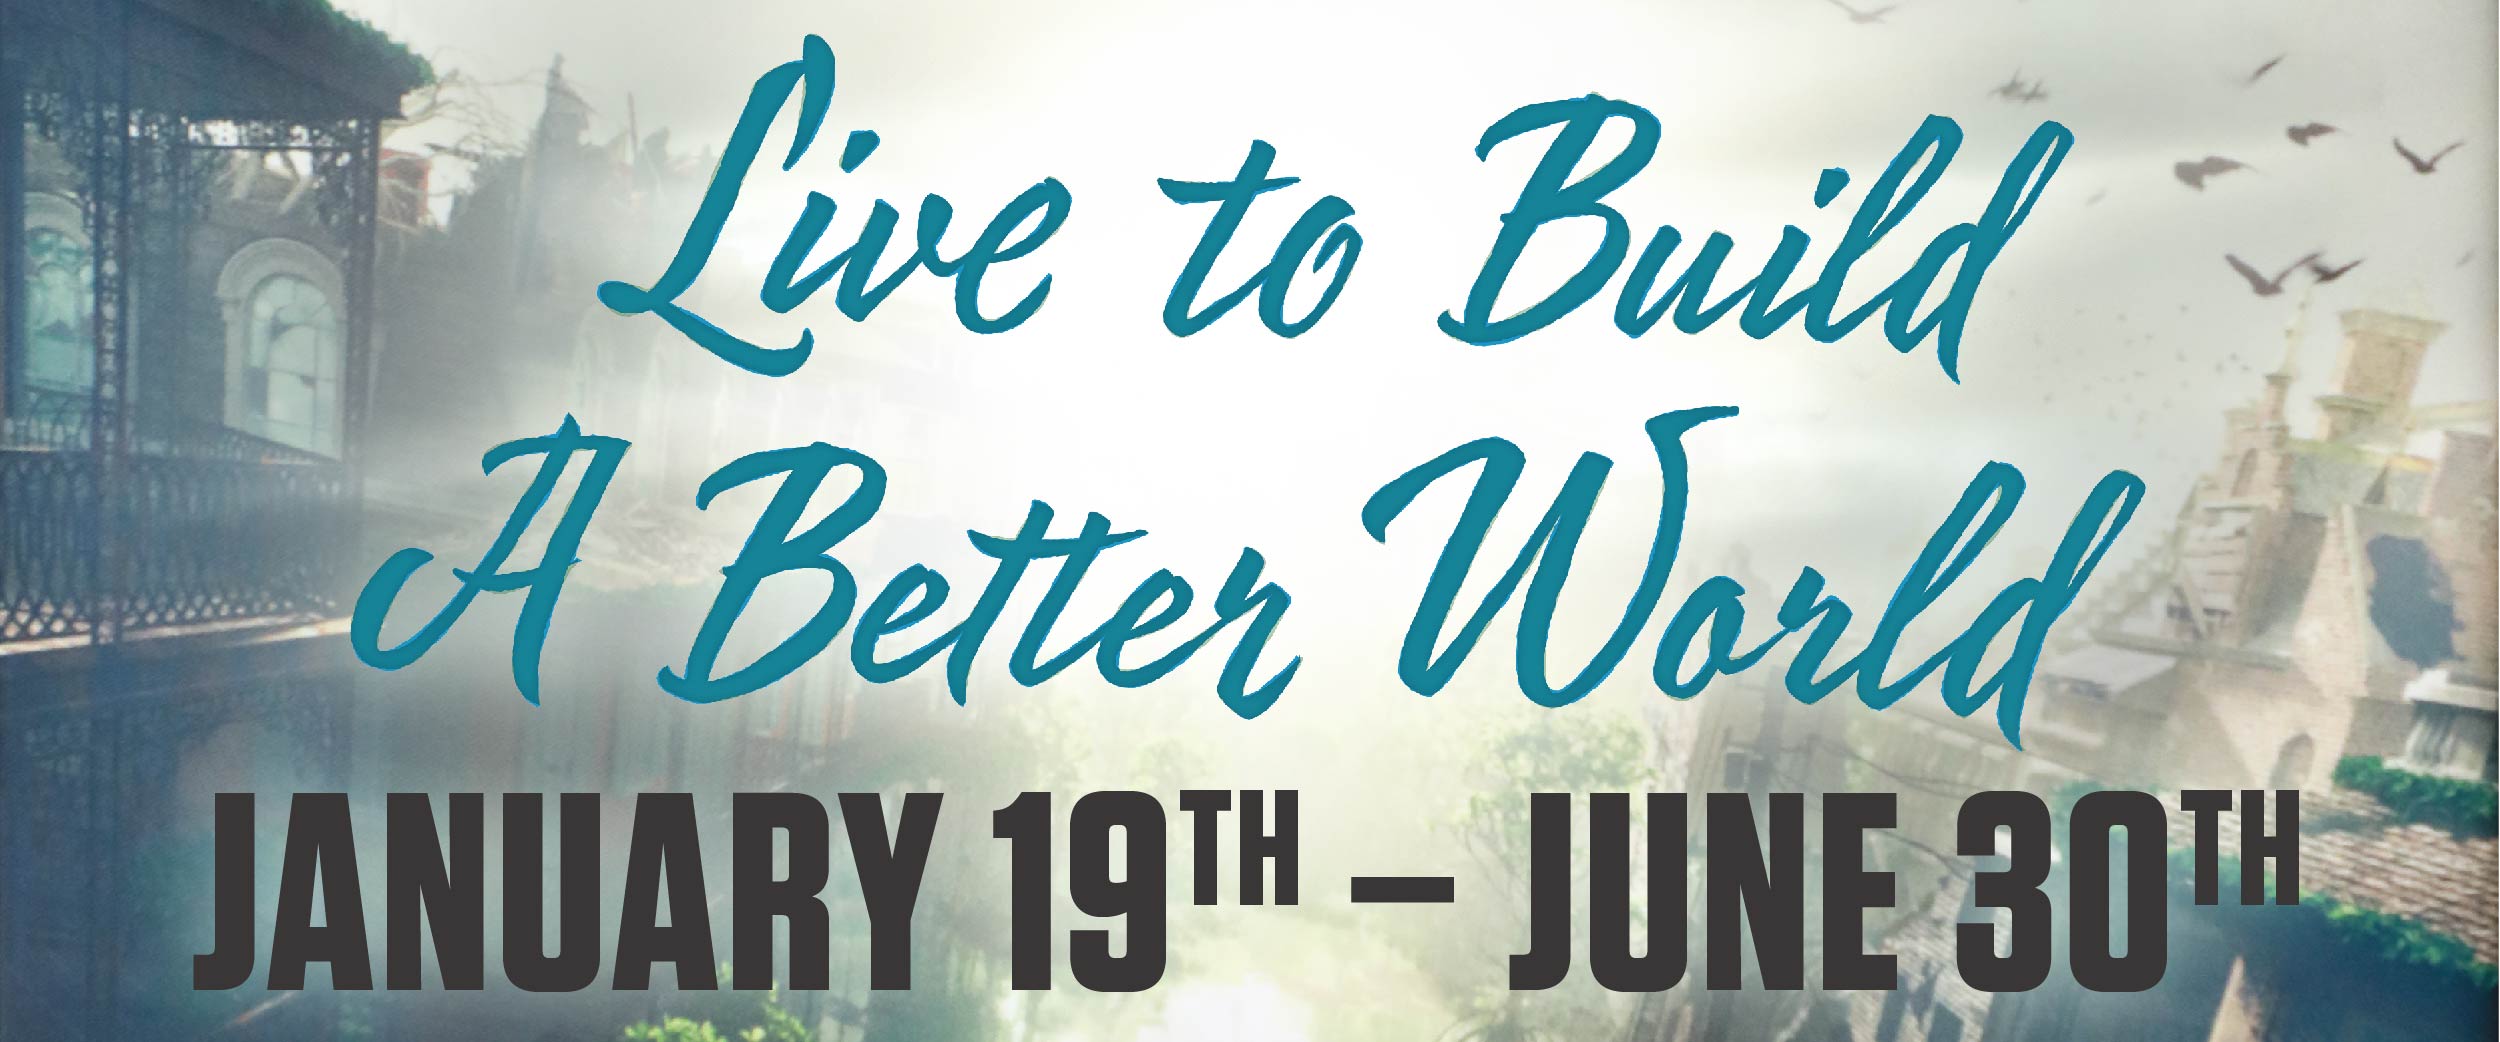 Live to Build a Better World exhibit at Cushing Library from January 19 - June 30th